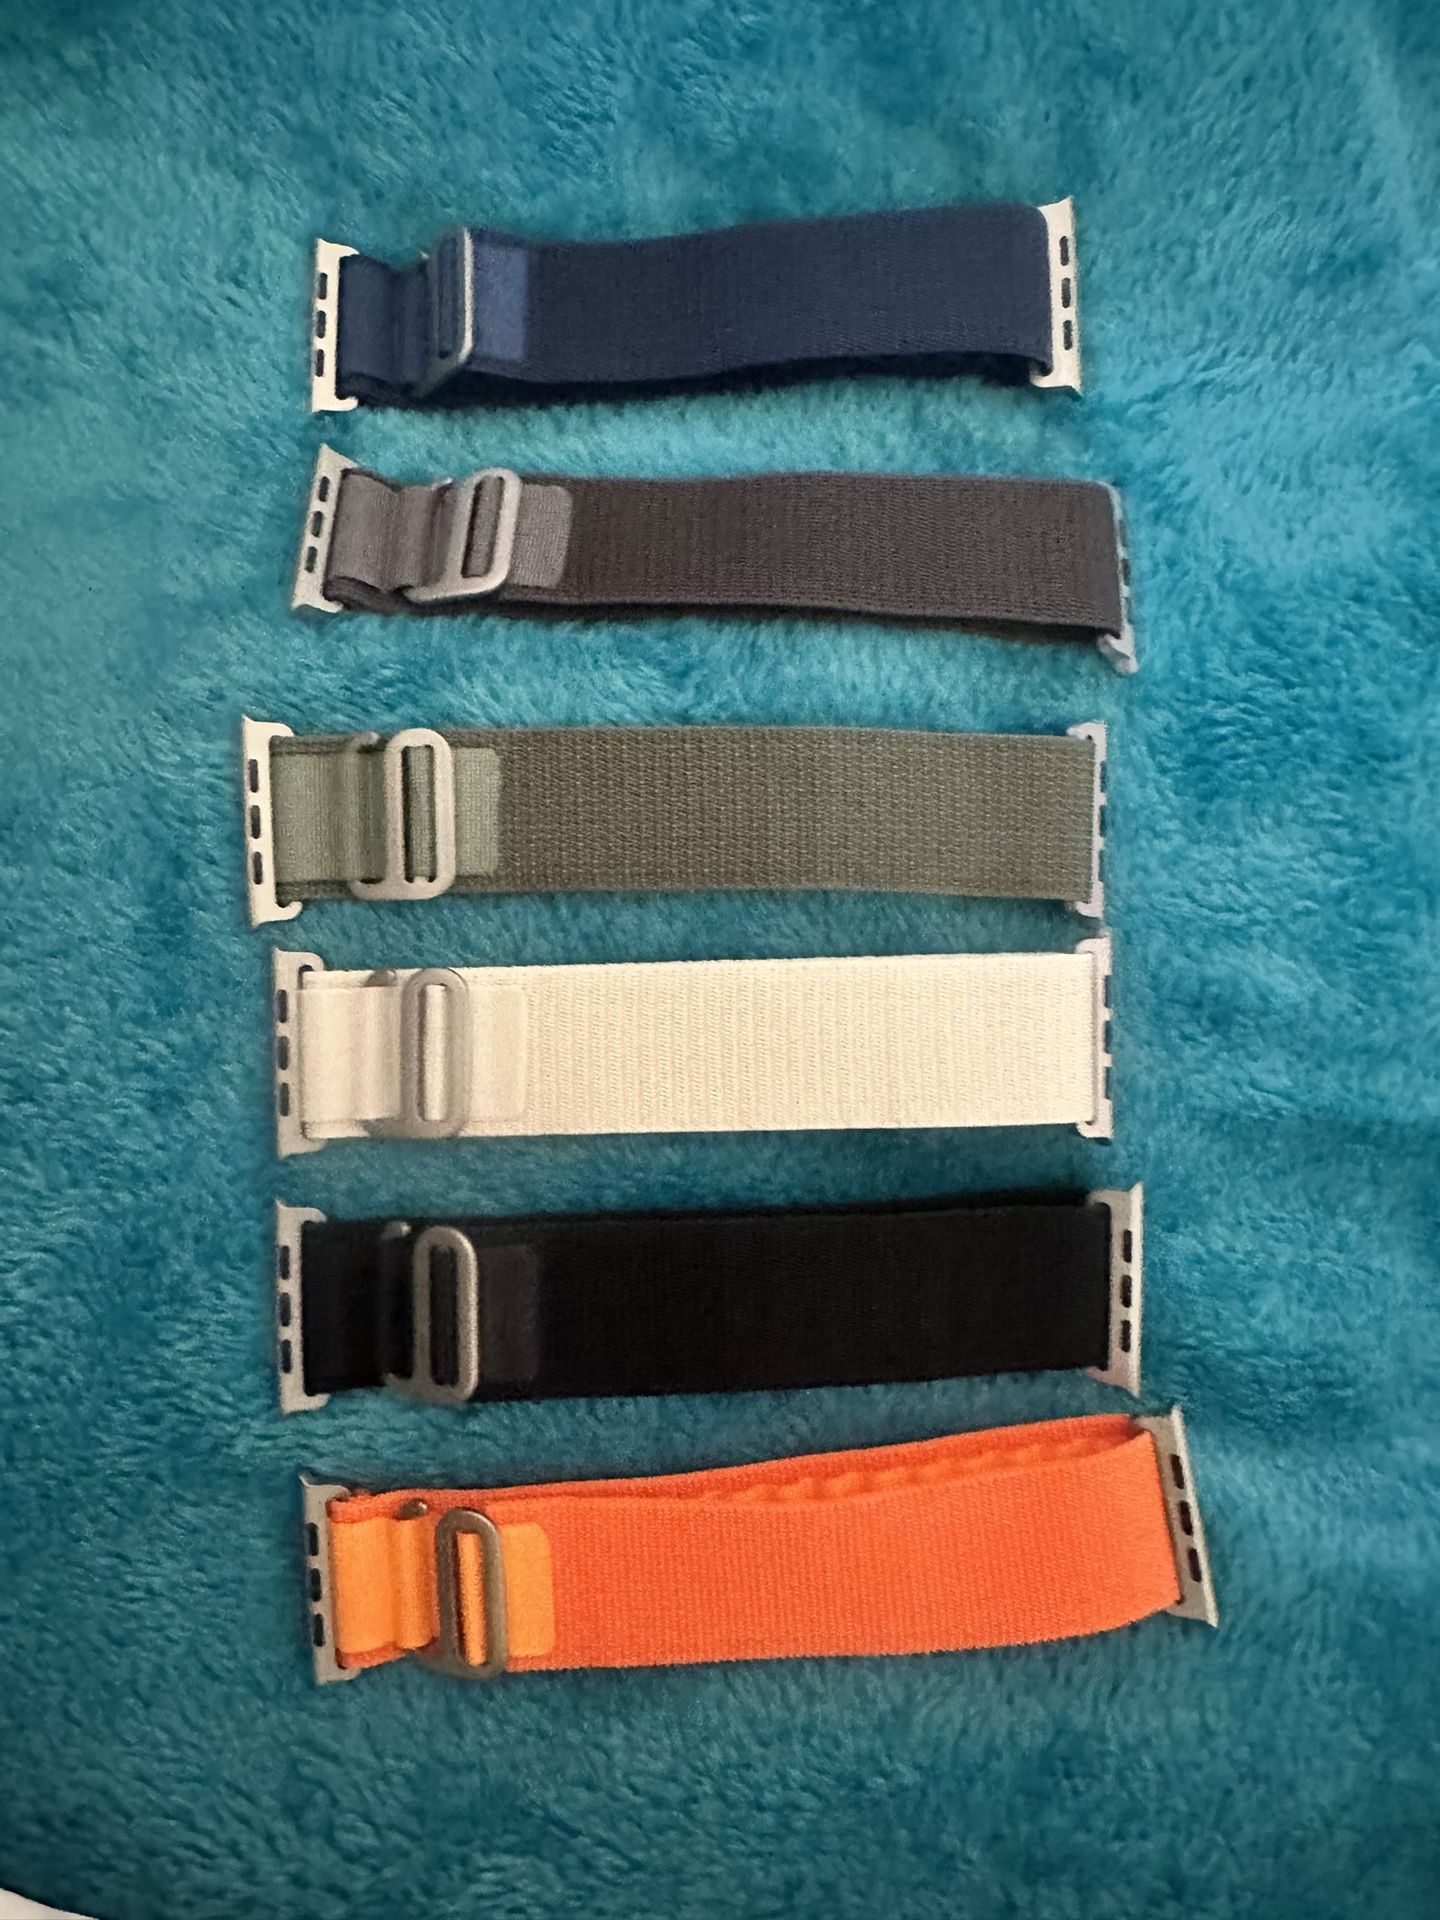 6 Apple Watch Bands - Nylon for Sale in Las Vegas, NV - OfferUp